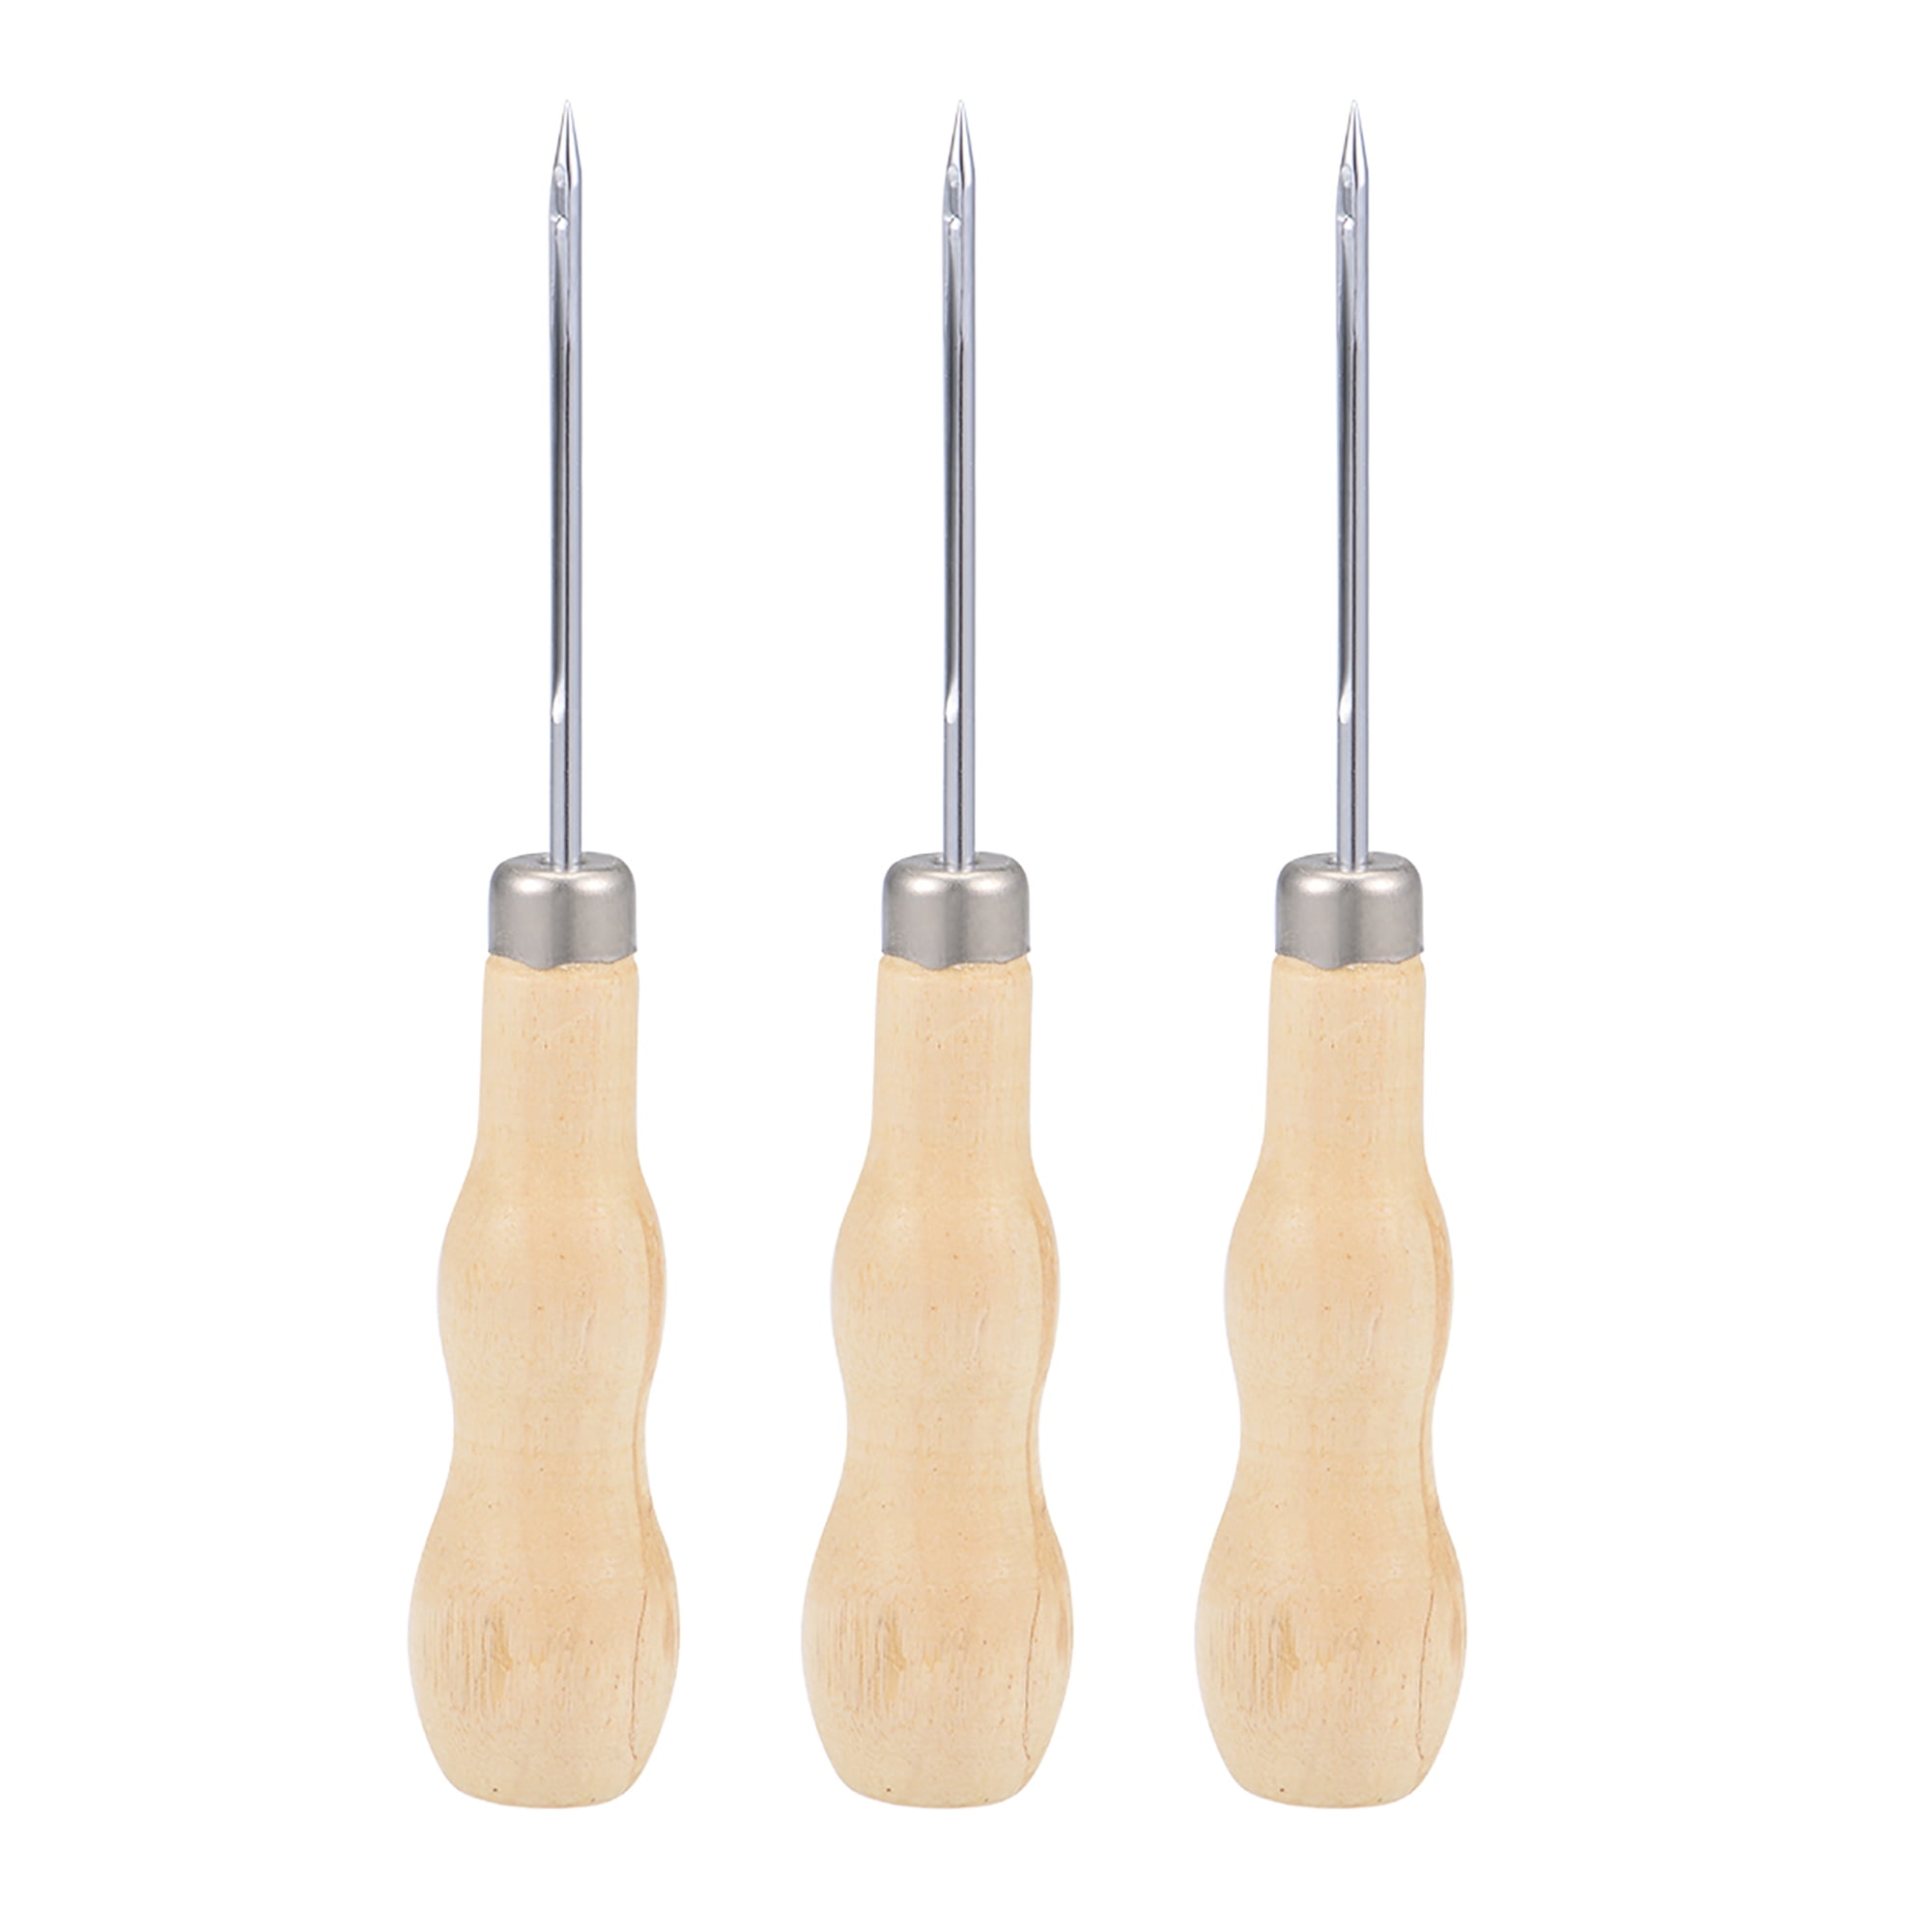 Uxcell Leathercraft Awl Tool Metal Pin Punching Hole Maker 3 Pack ...